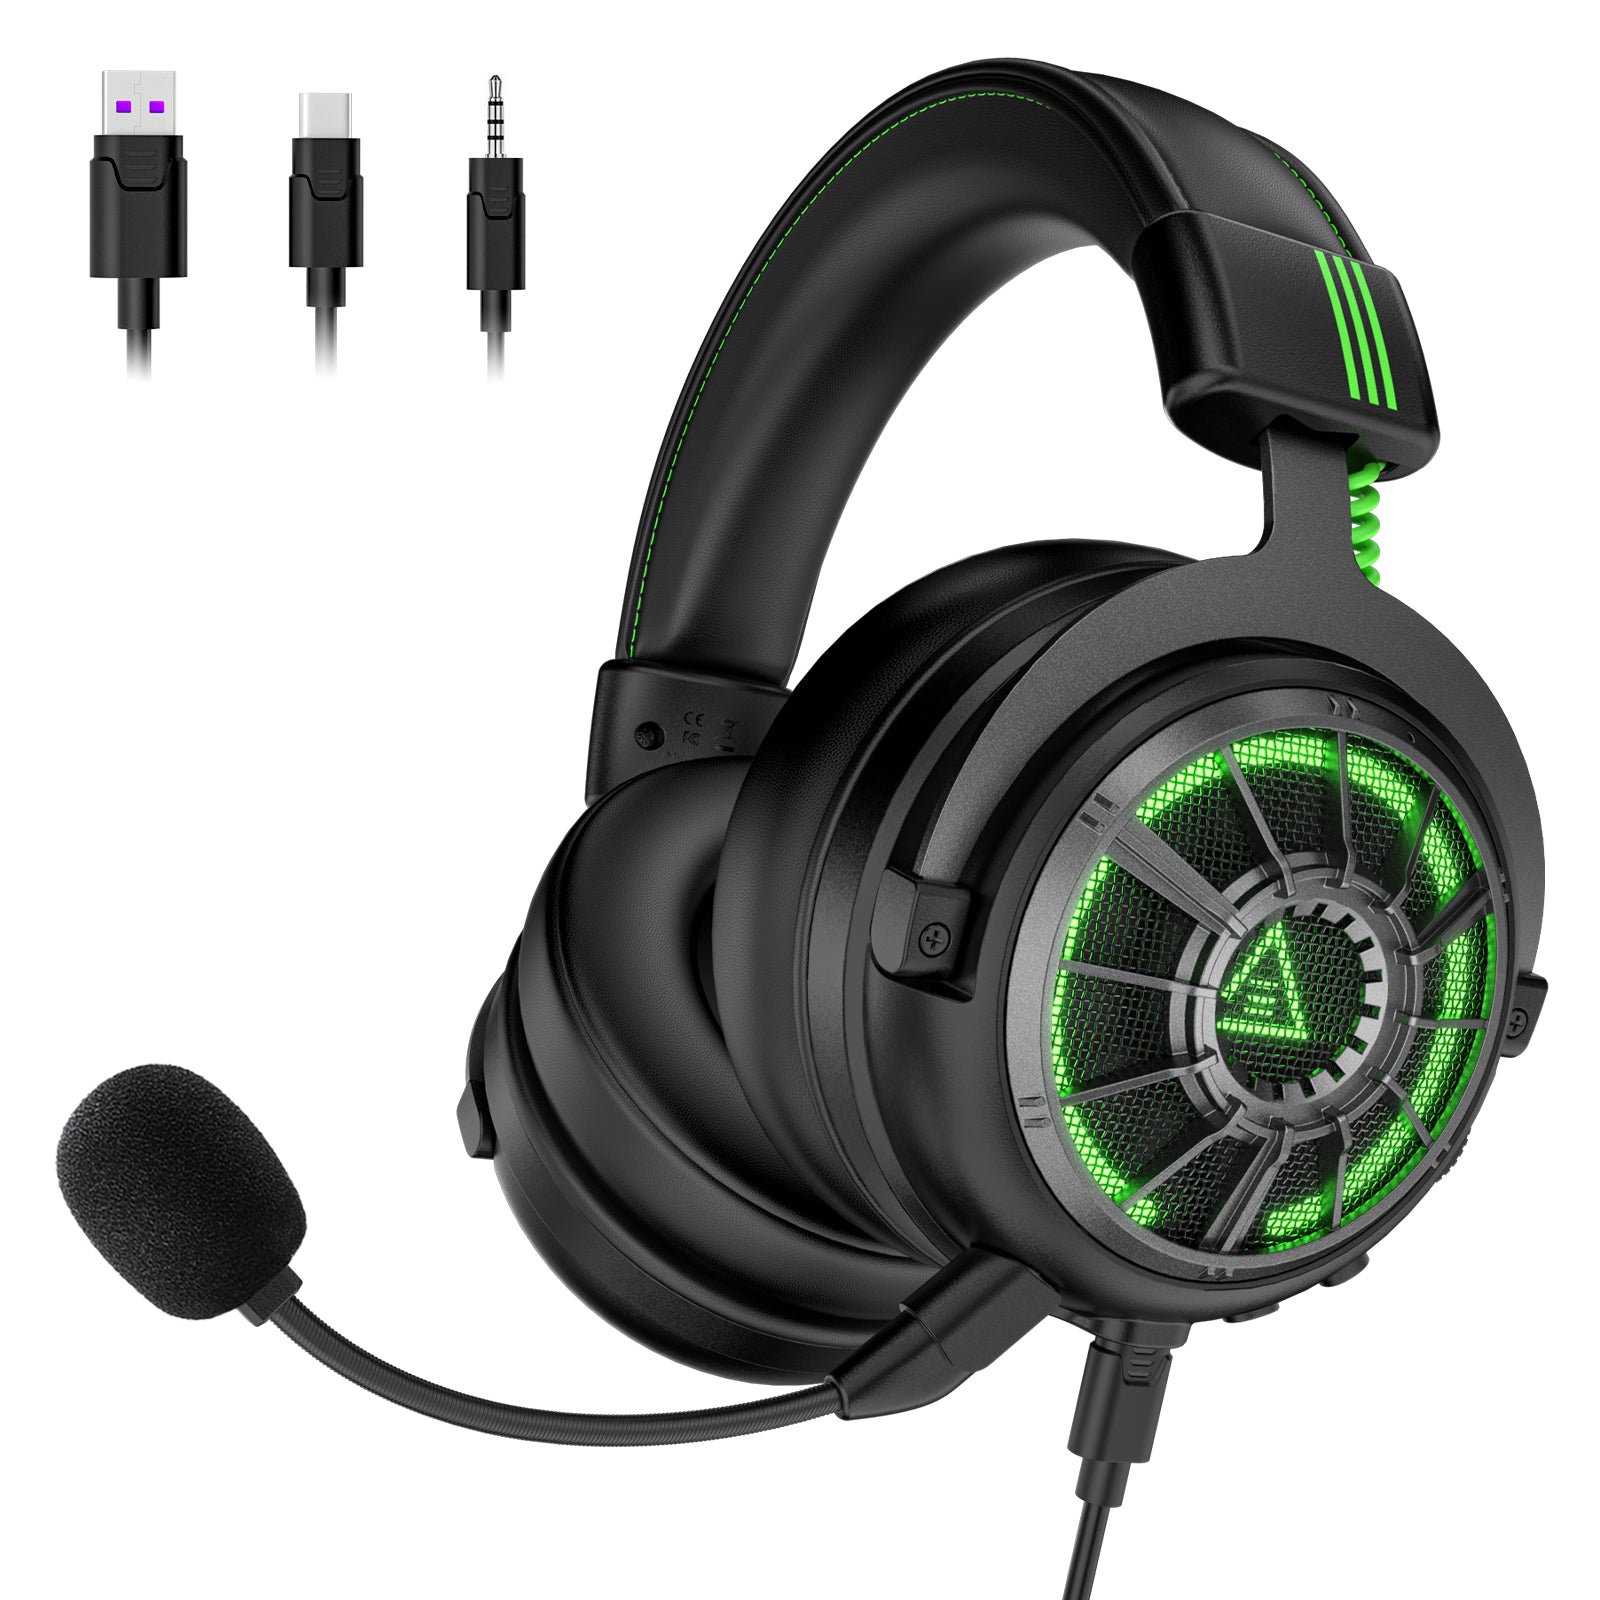 EKSA StarEngine Pro E5000 Pro 3in1 Gaming Headset Gamer , wired Gaming  headphones for PC/PS4/PS5/Xbox - Aliexpress